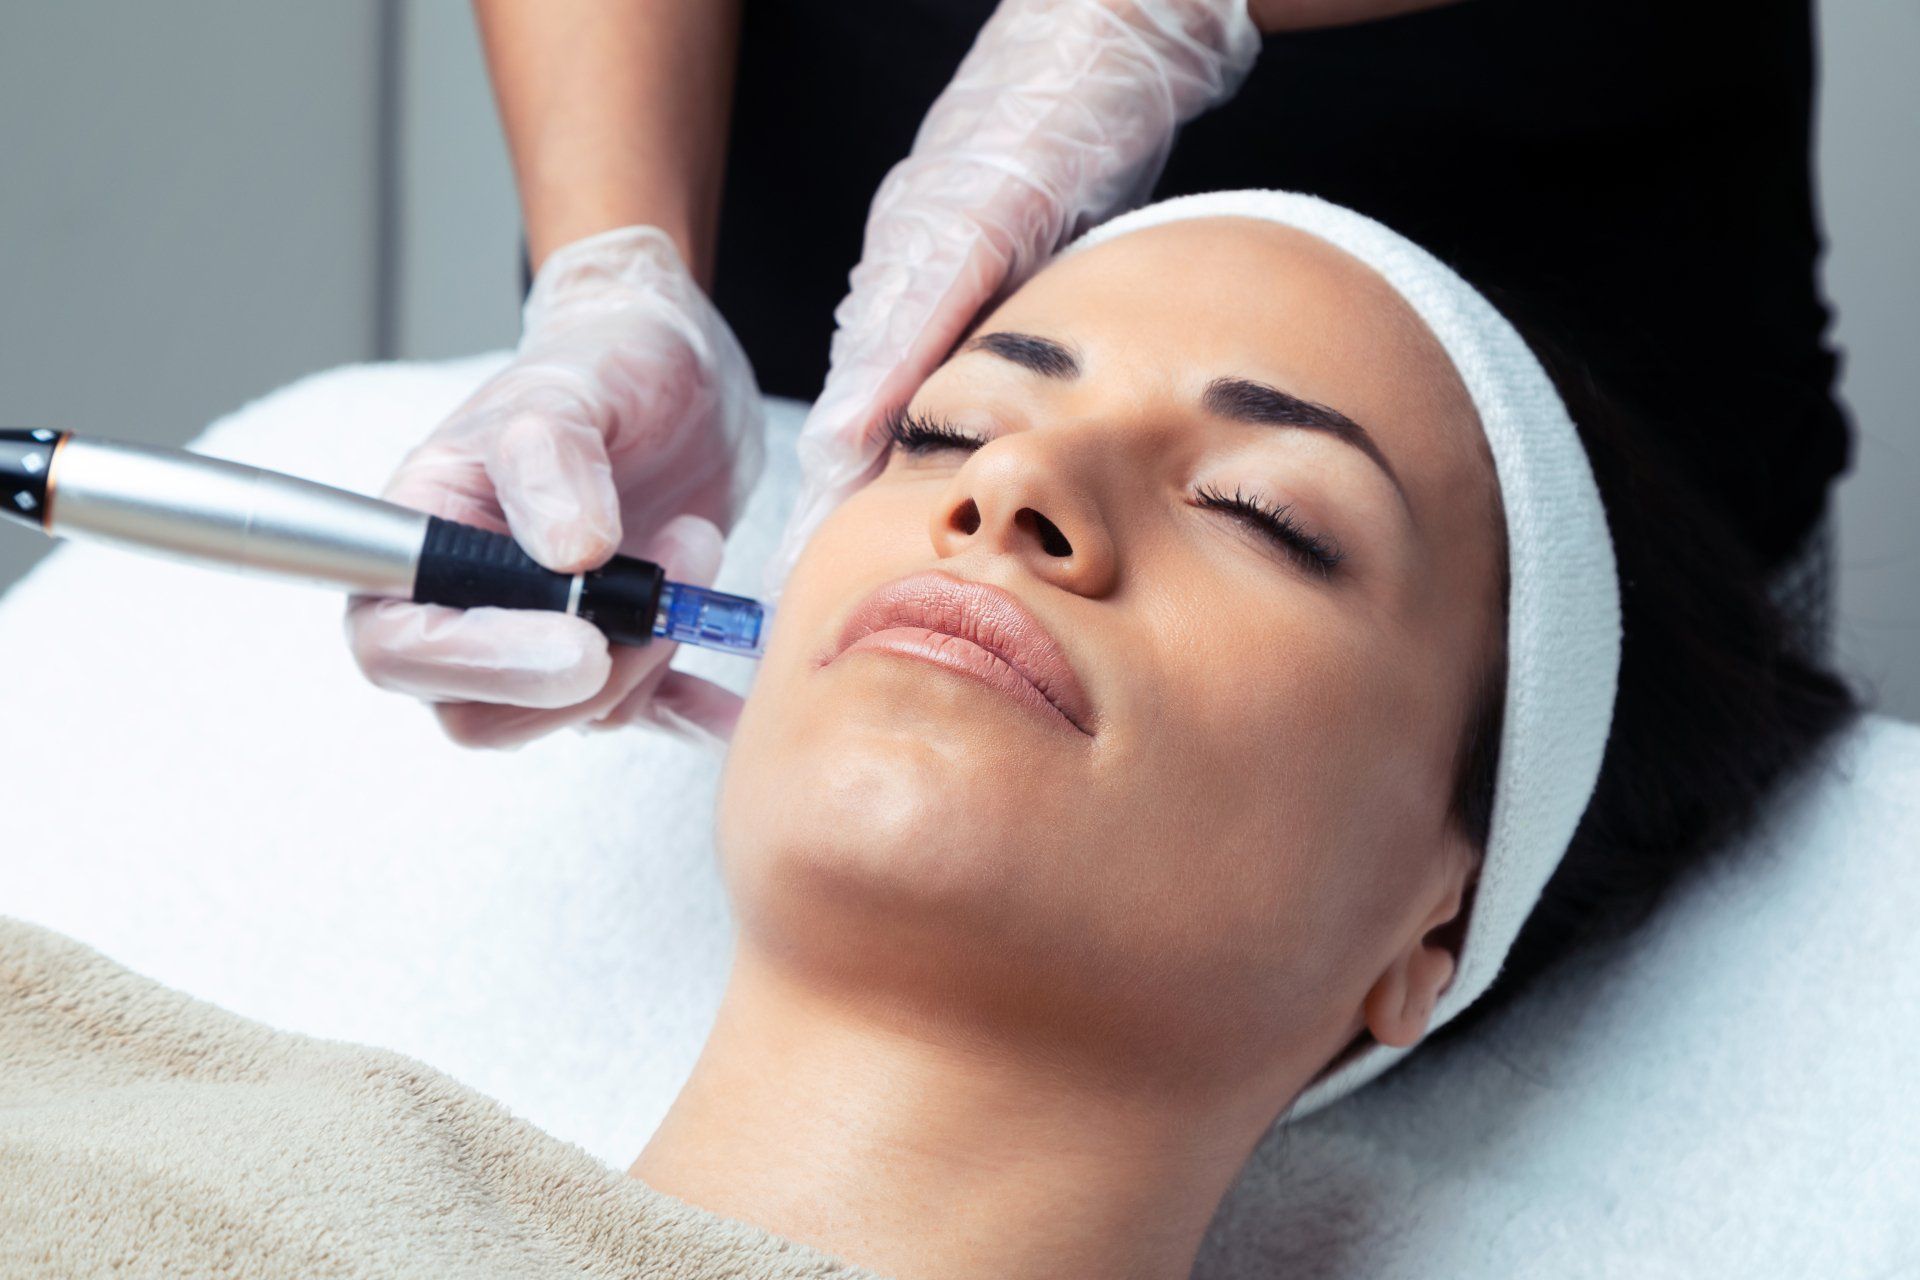 Woman receives microdermabrasion treatment